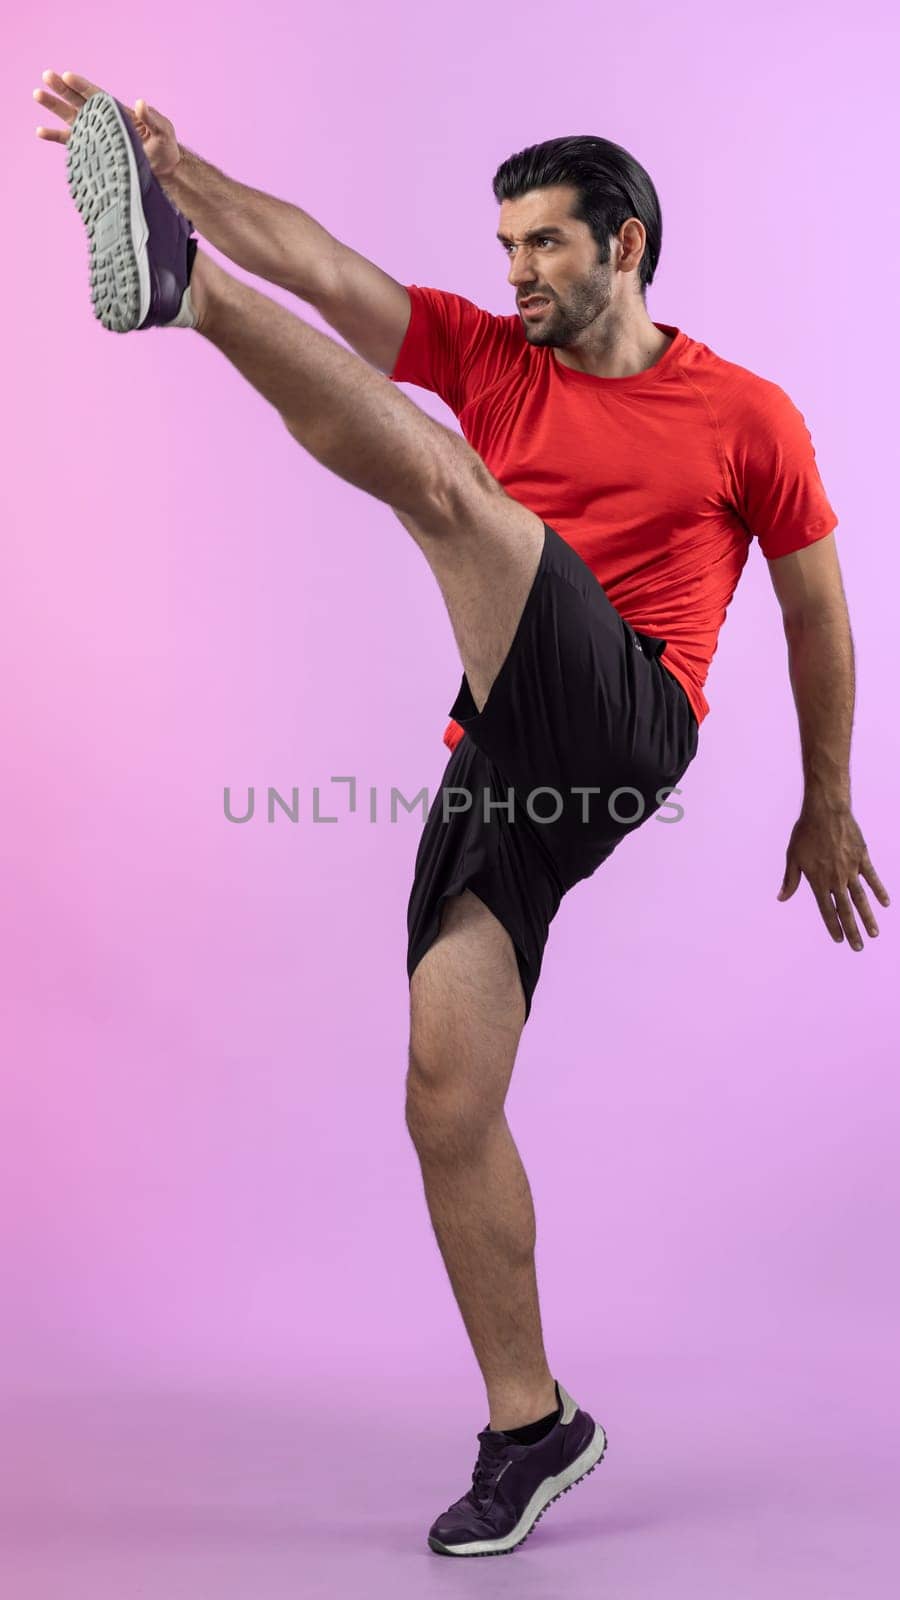 Full body length gaiety shot athletic sporty man with kicking position posture by biancoblue